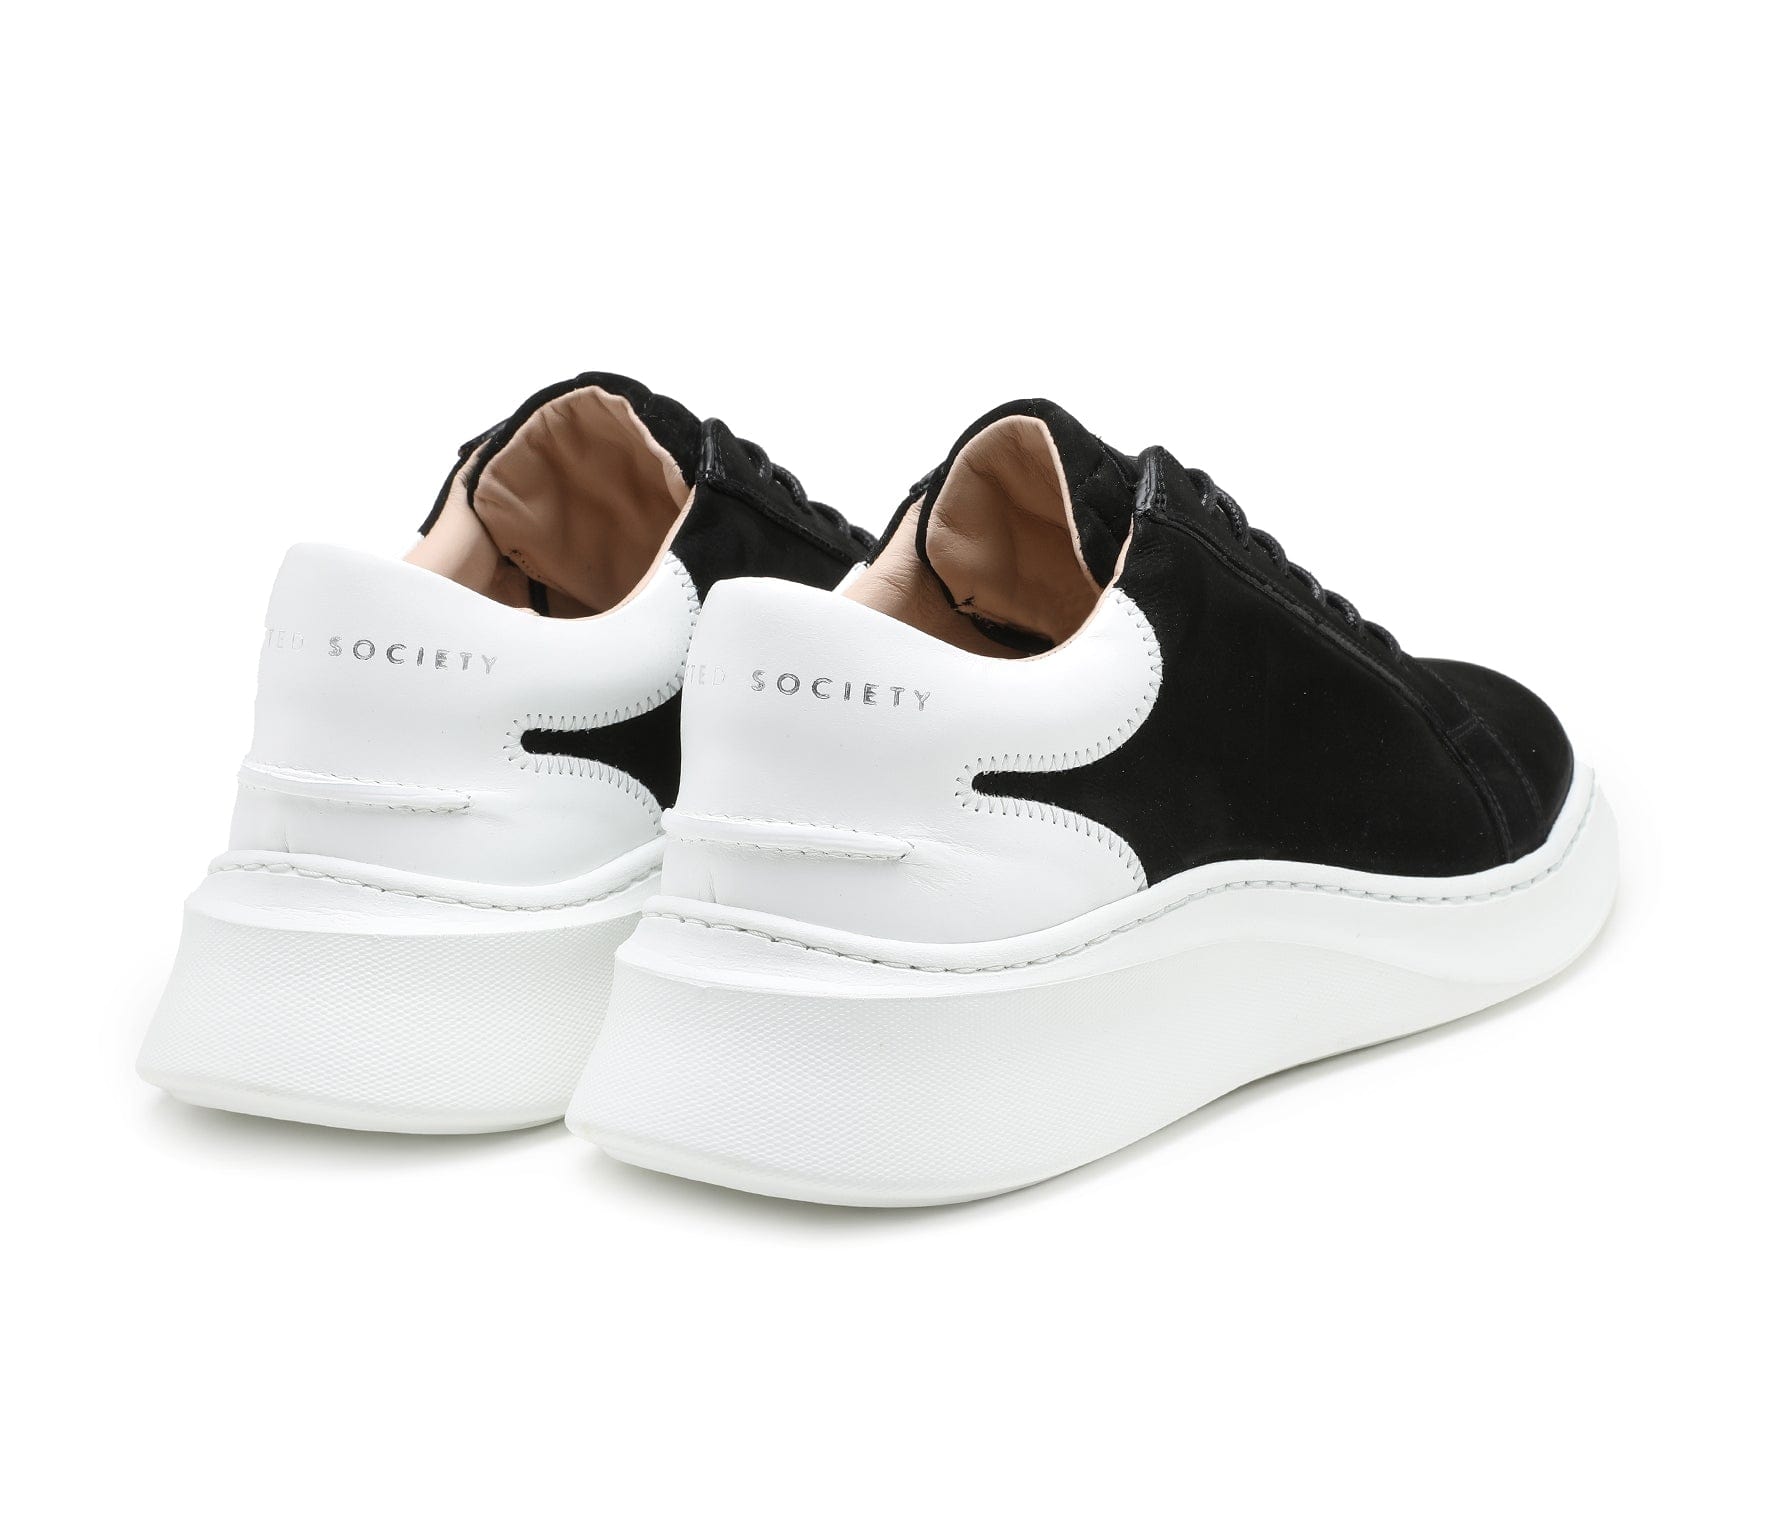 Matteo Low Top Sneaker | Black Nubuck & White Full Grain Leather | White Outsole | Made in Italy